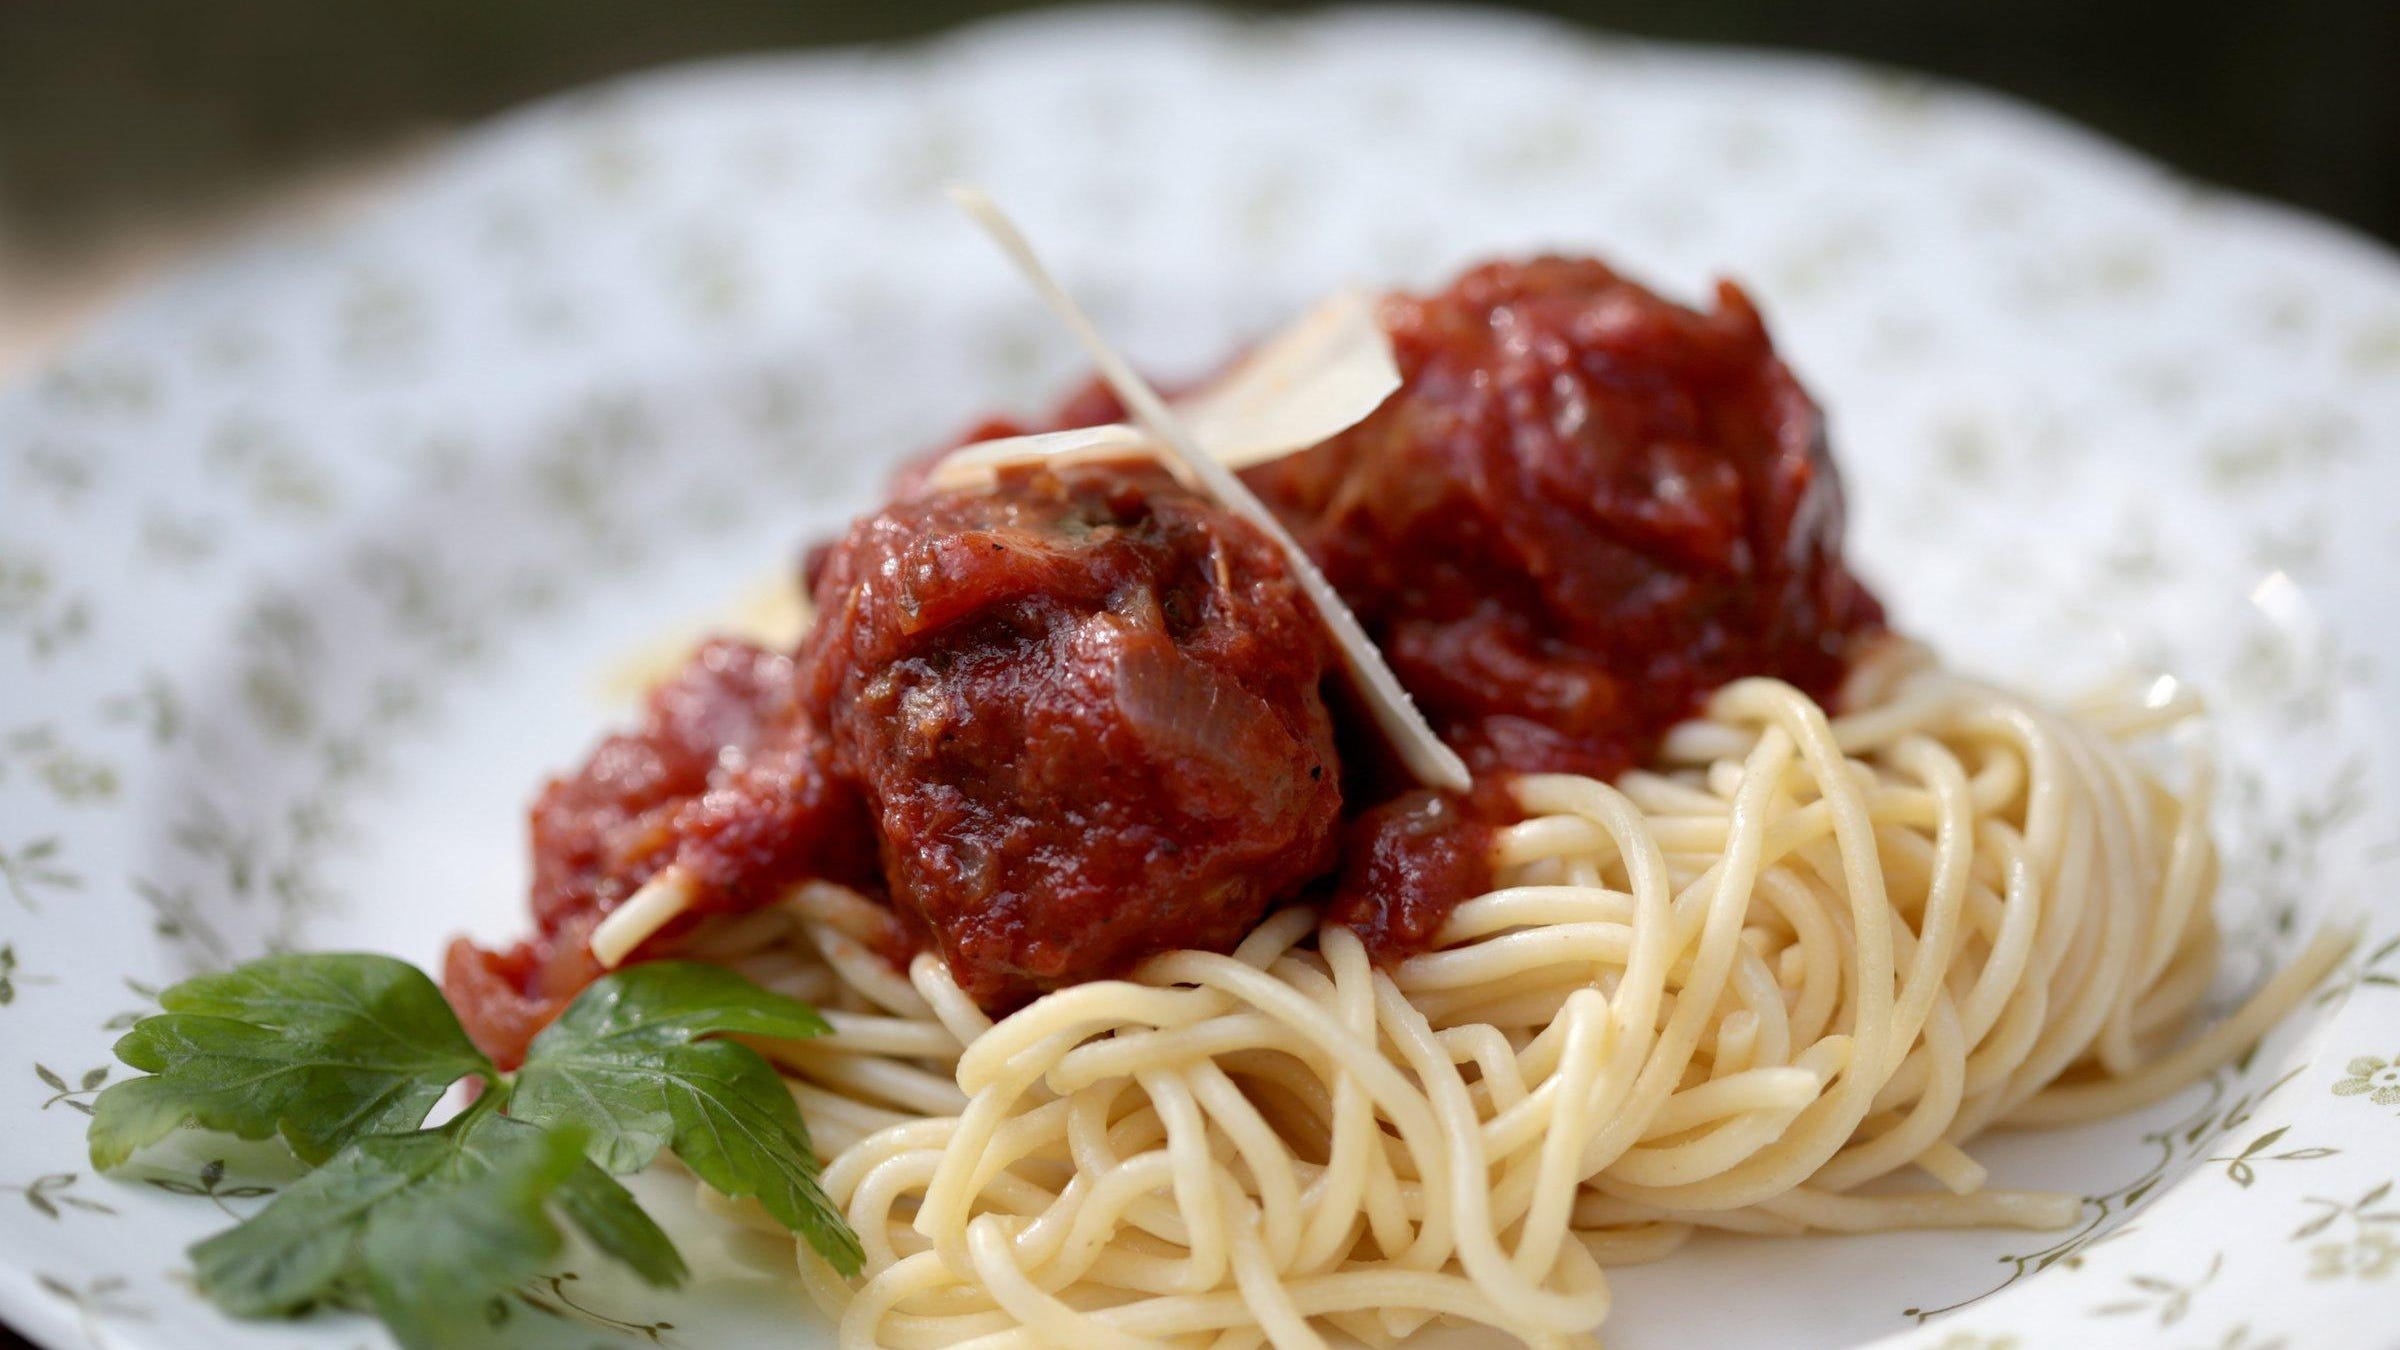 A general rule when forming meatballs is to work quickly and handle them as little as possible.